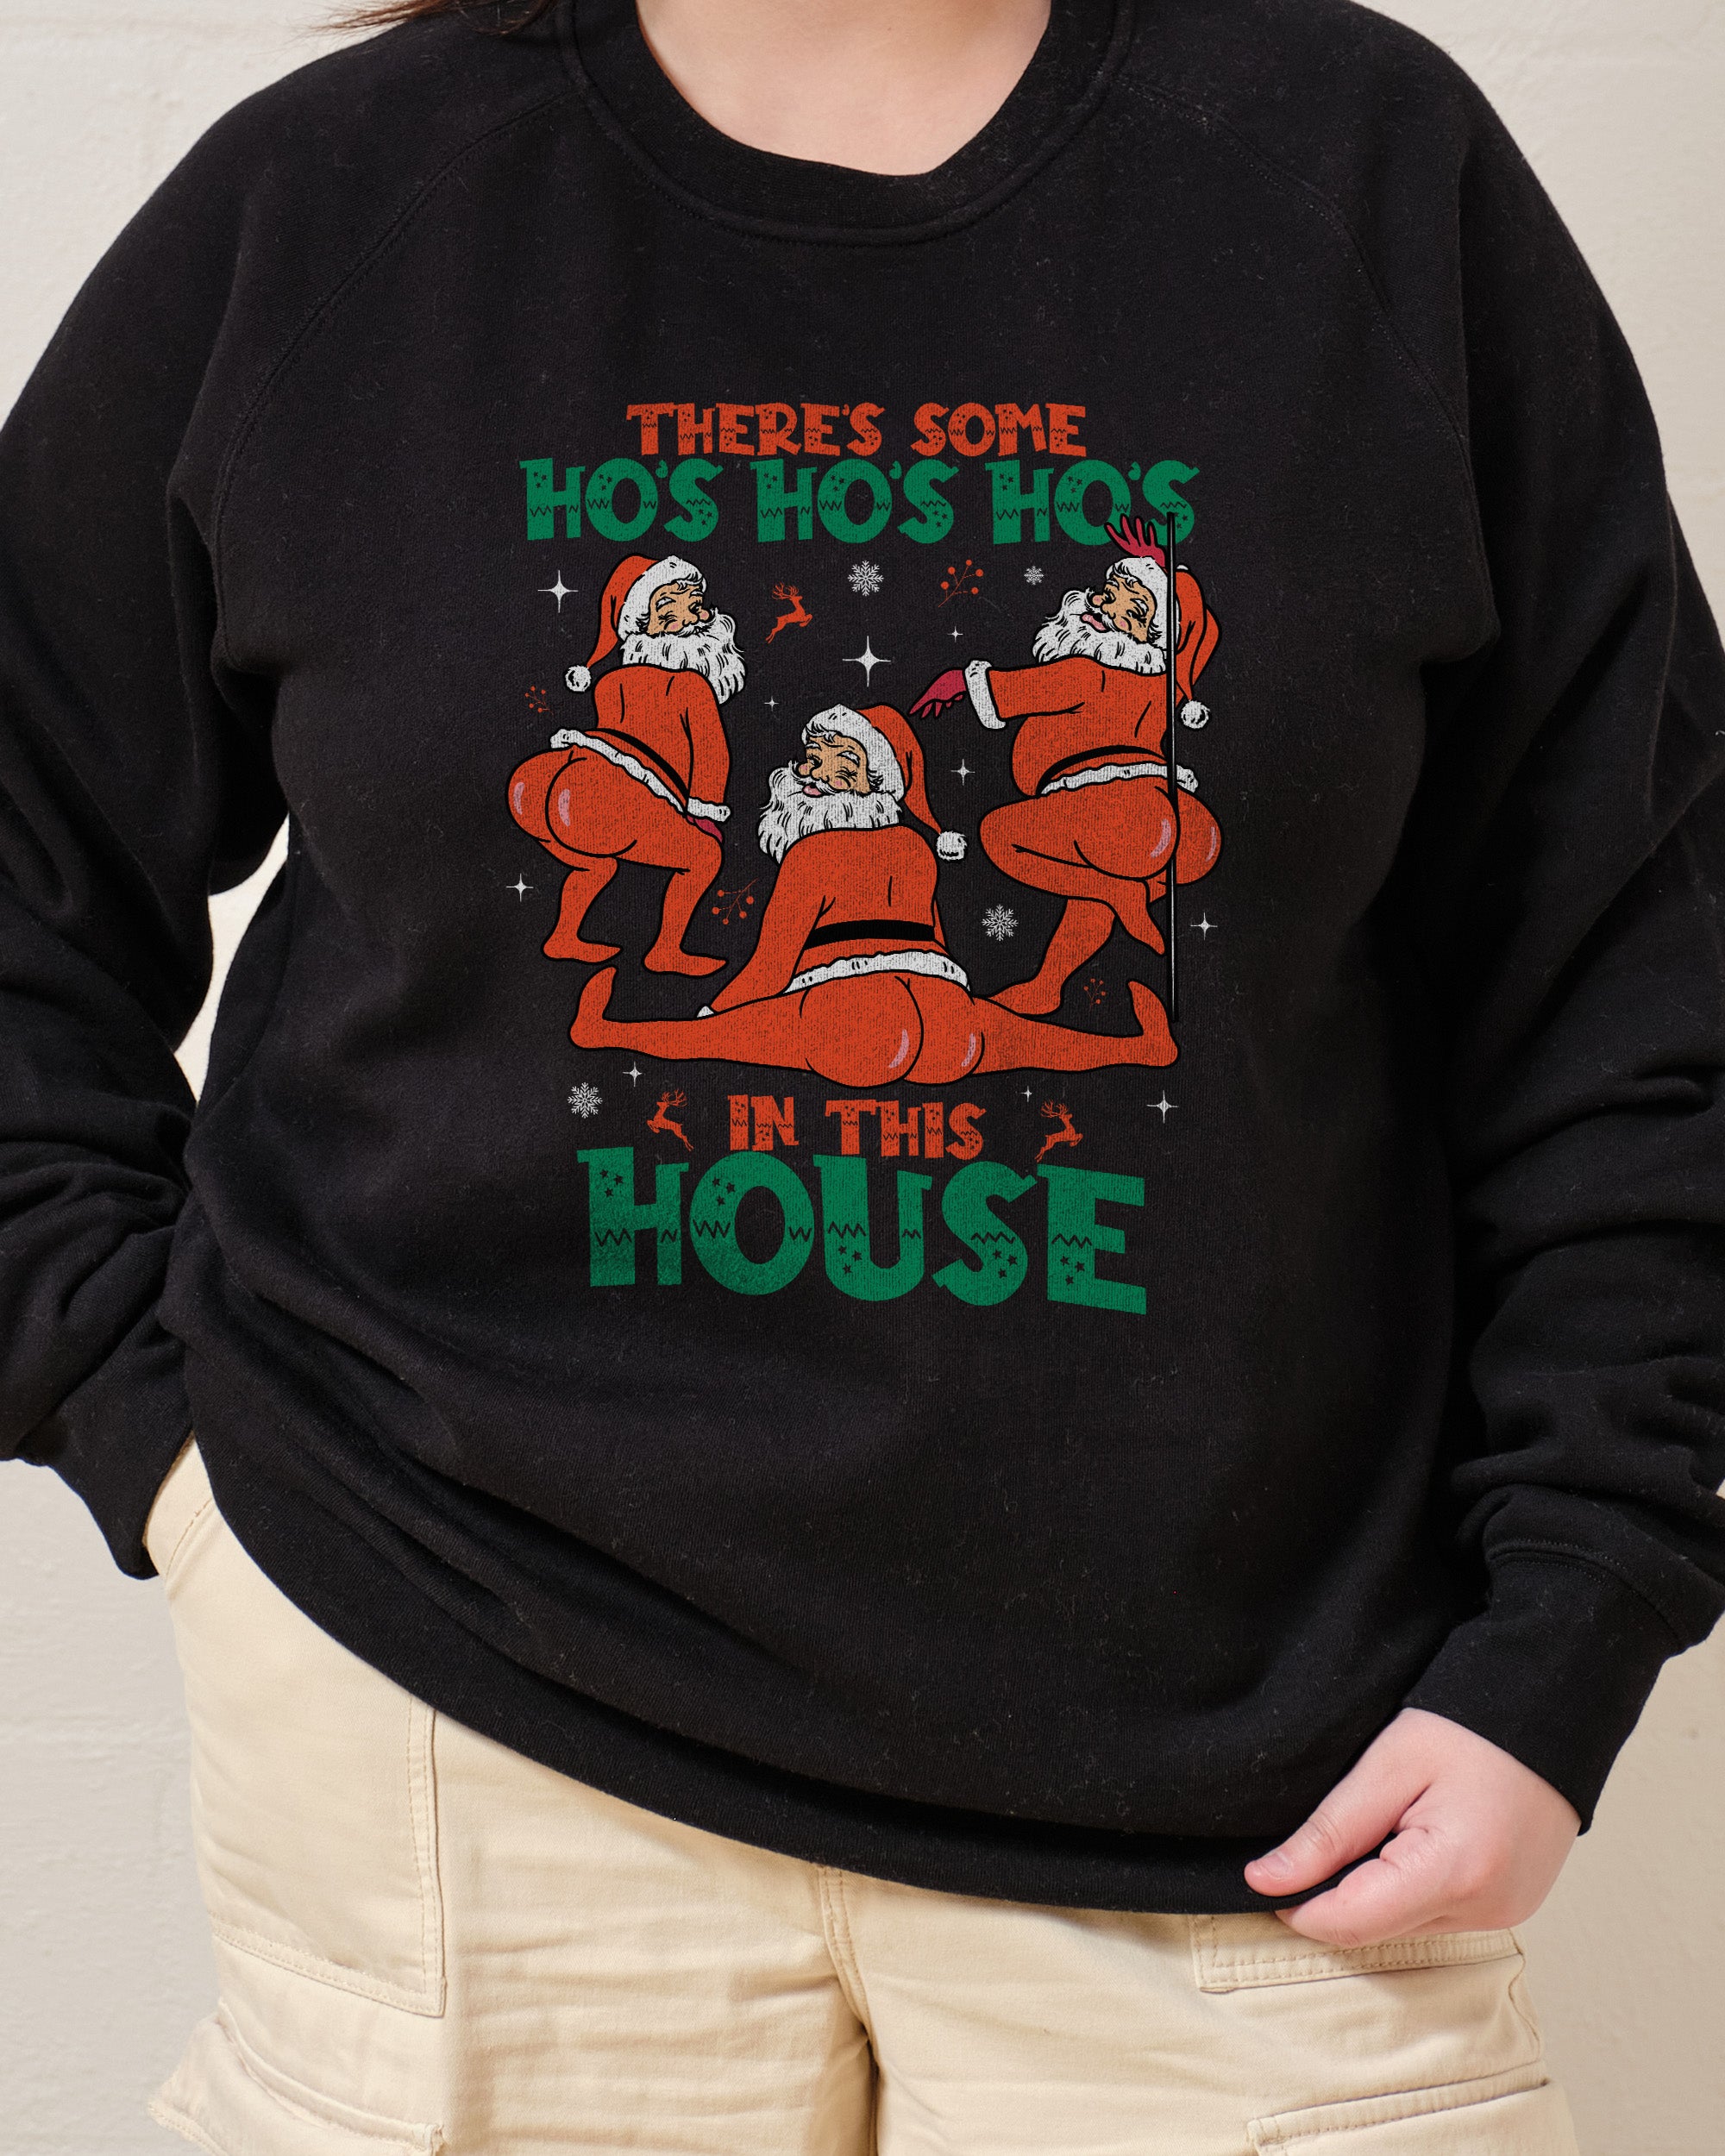 There's Some Ho's Ho's Ho's in This House Jumper Europe Online Black